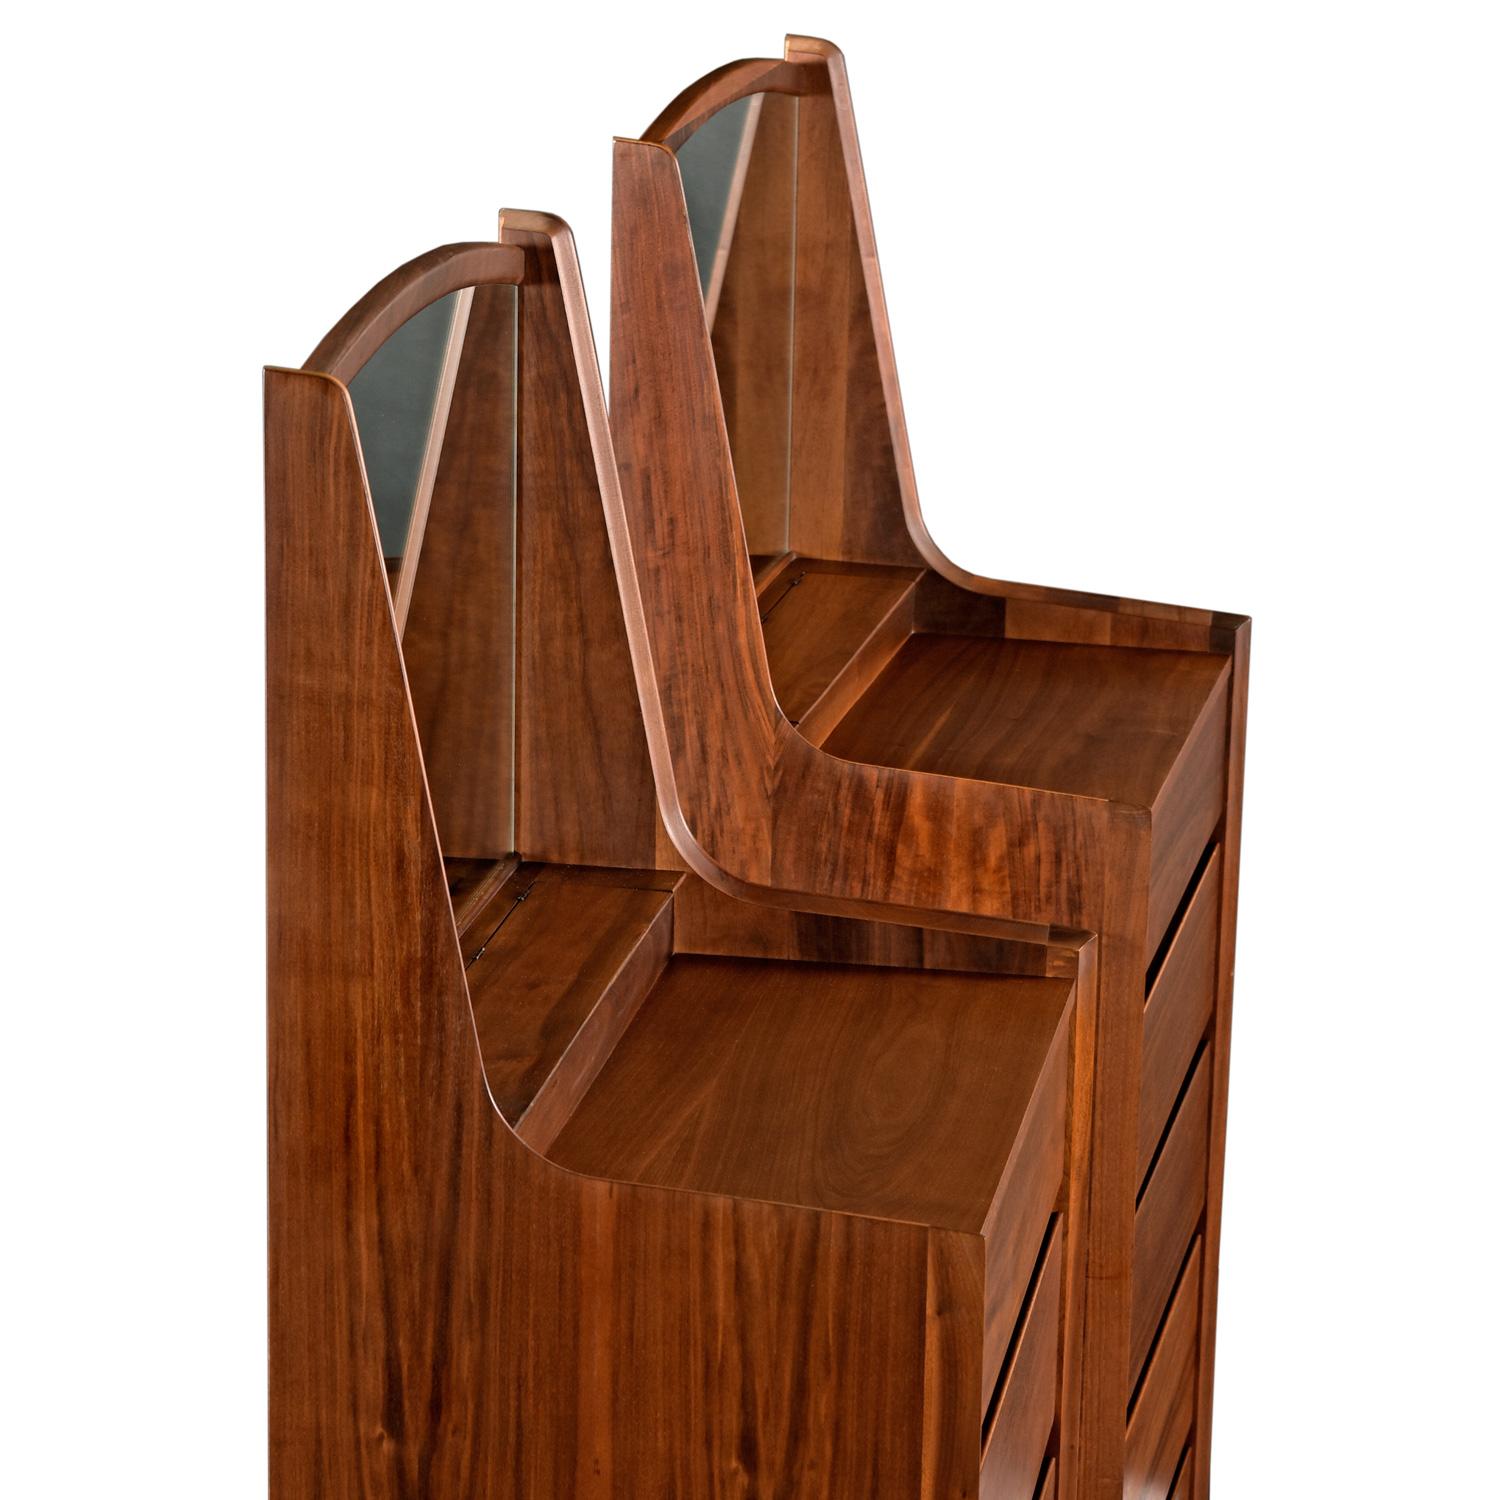 ONLY ONE DRESSER  available.

Mid-Century Modern highboy dresser from Dillingham's esprit line. One of the most sought after American mid-20th century collections, Esprit's handsome, minimalist style has become a favorite. This sexy, sculpted arched